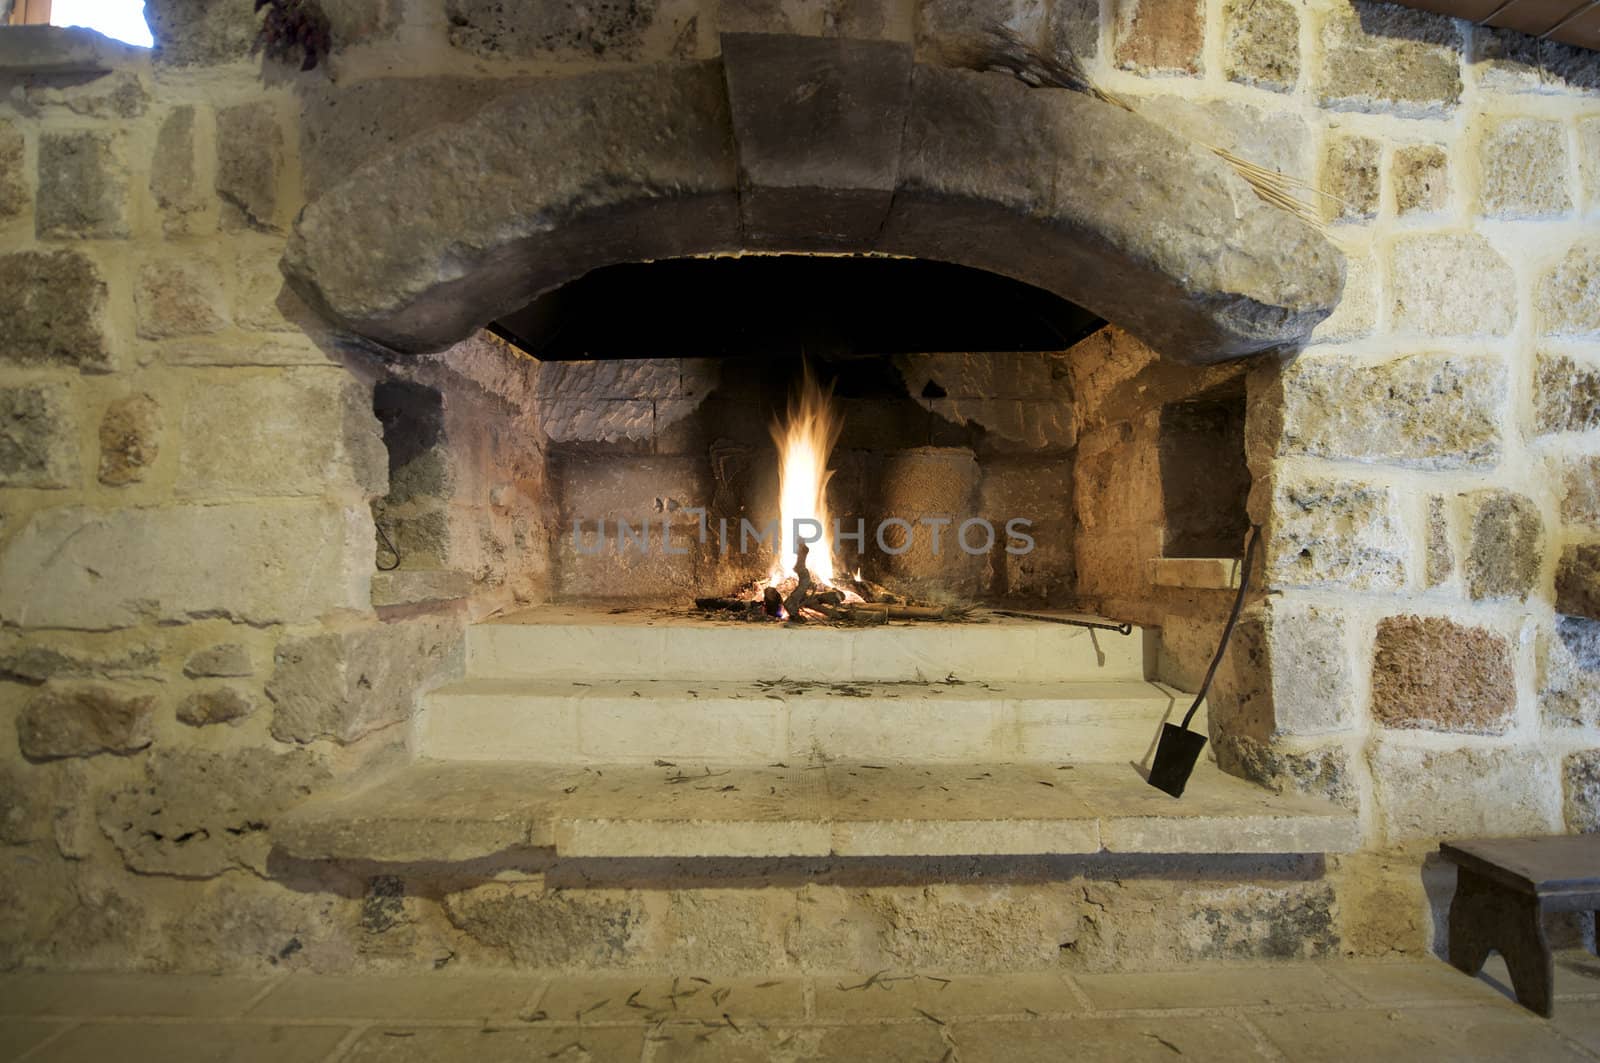 flame in fireplace by bravajulia